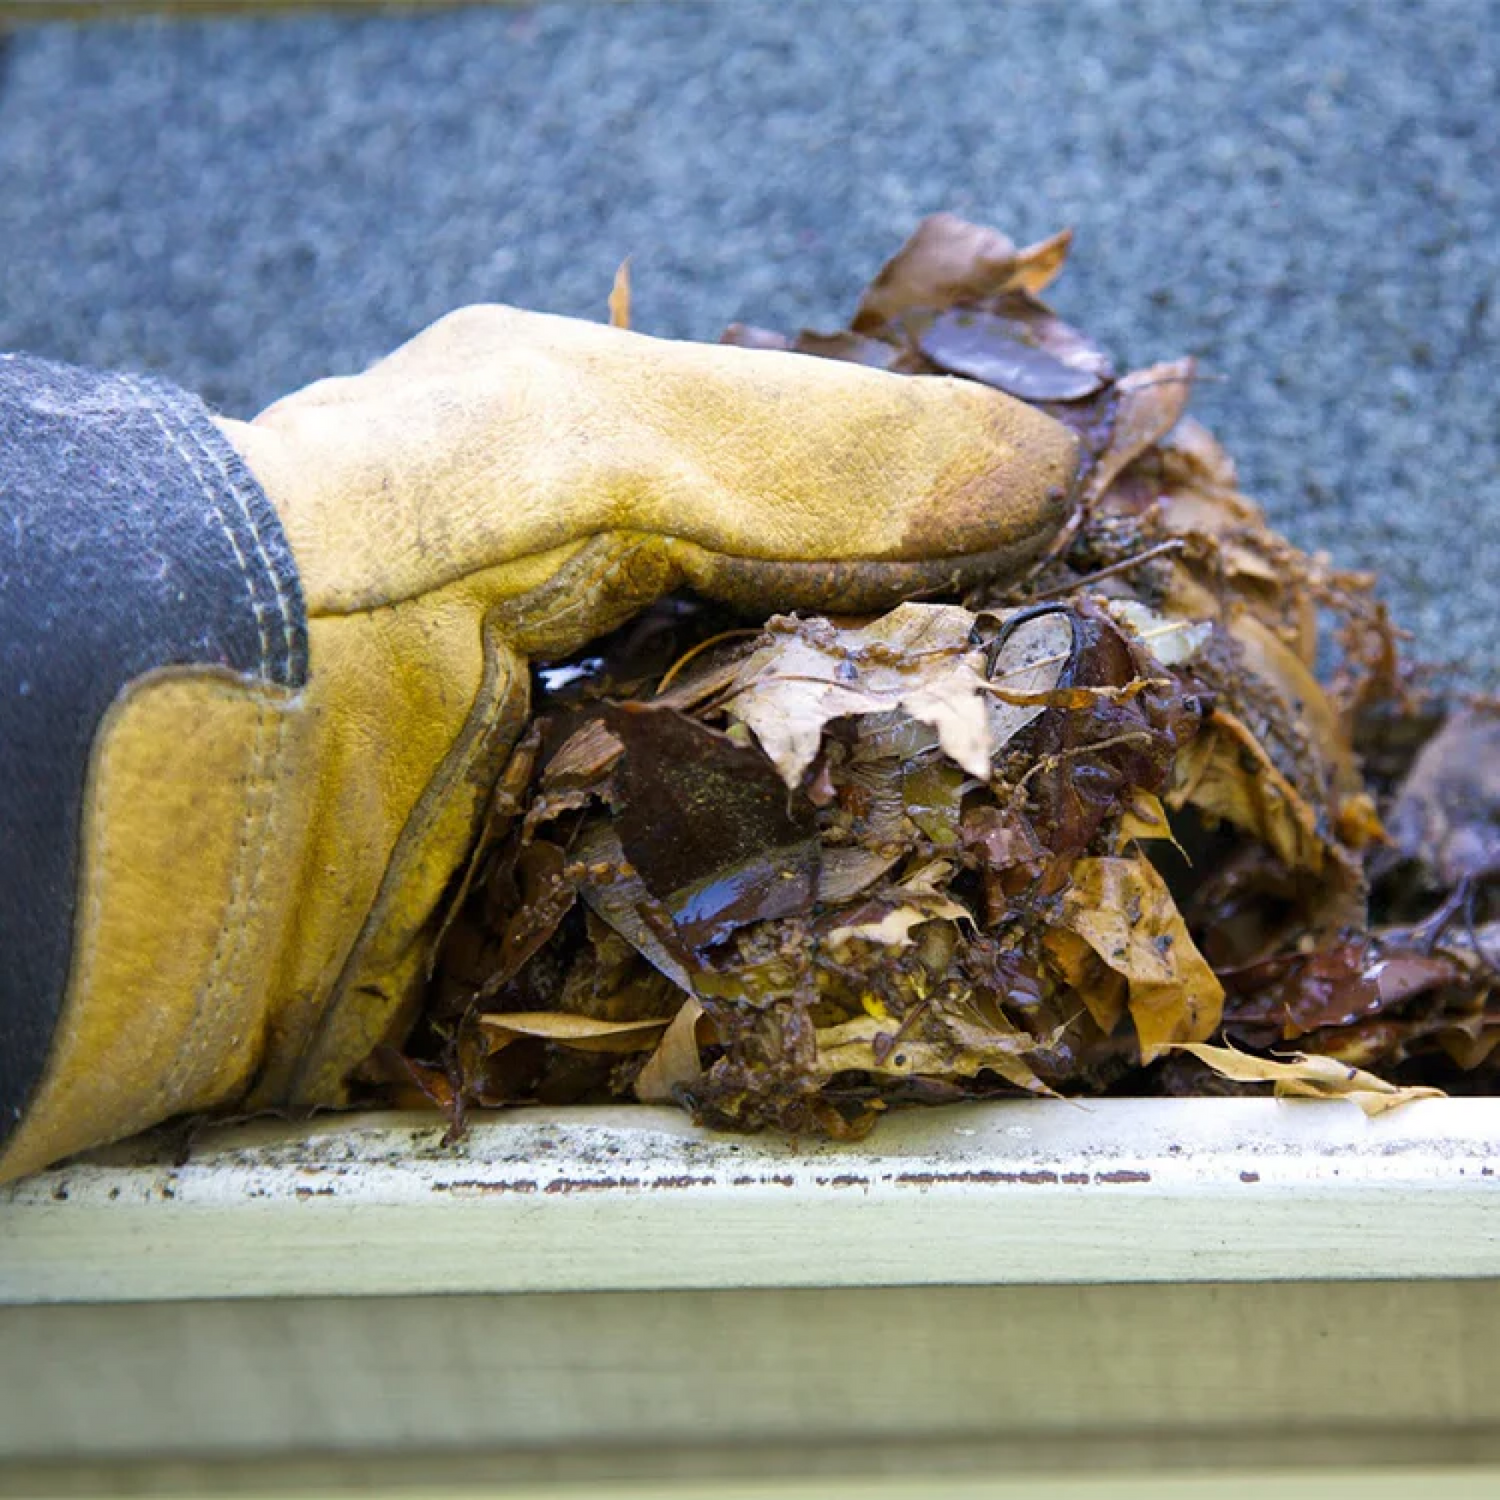 Remove debris from gutters